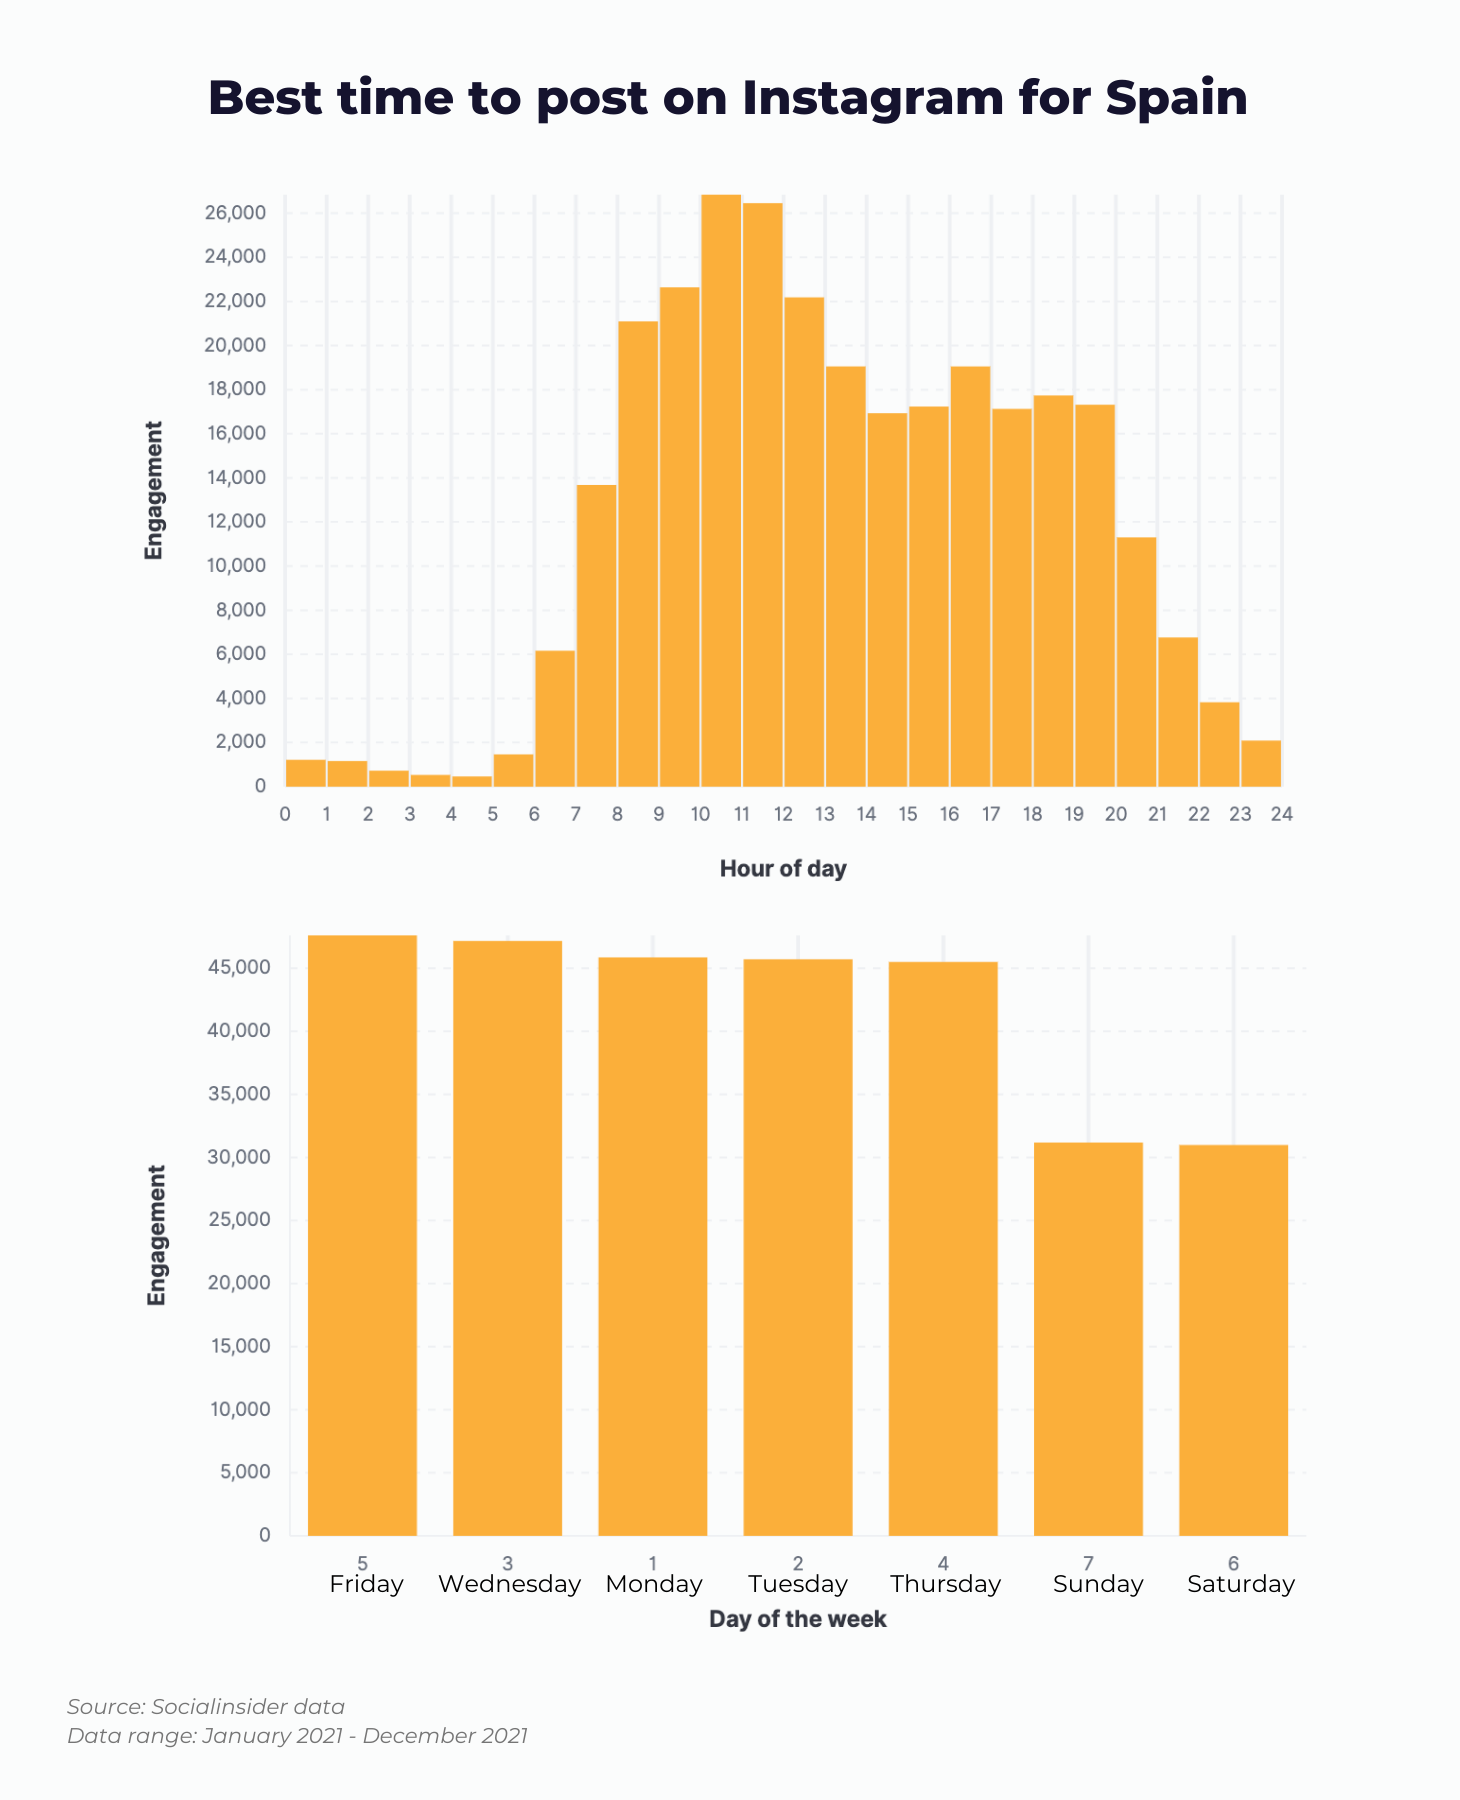 Here is a chart showing what data tells about the best time to post on Instagram for Spain.